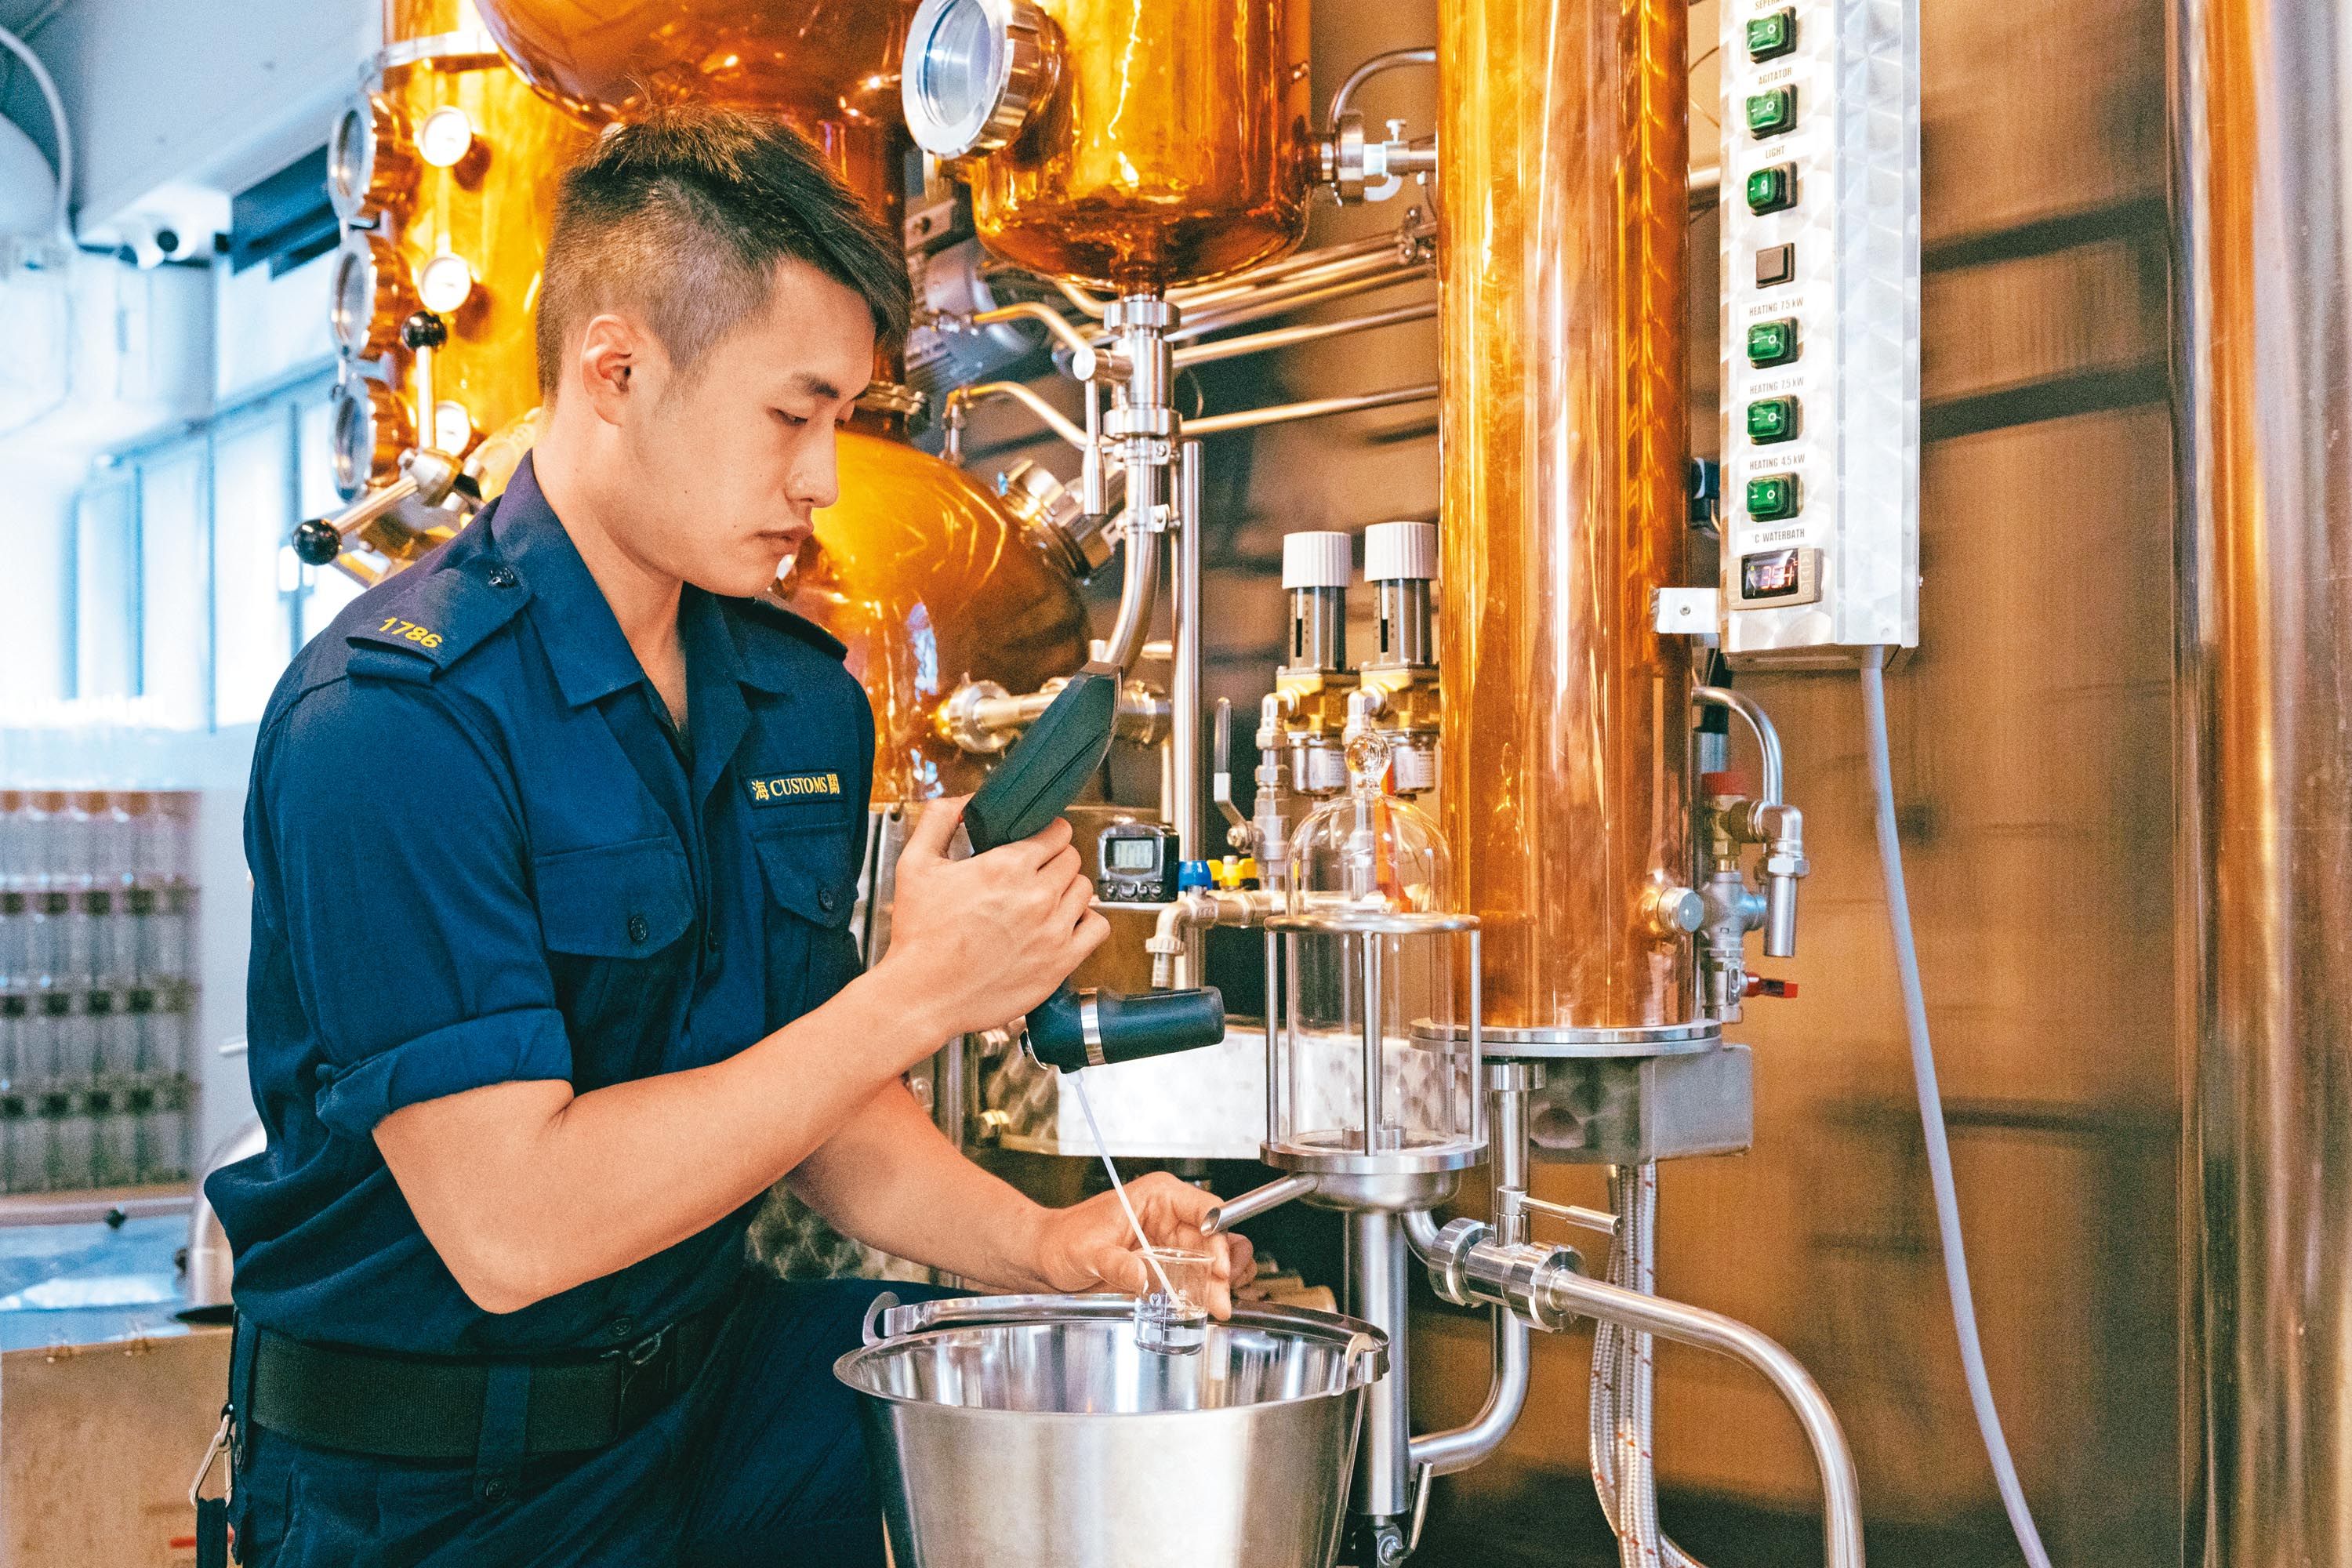 "Smart Liquor Valuation and Verification" An Optimized Valuation Initiative for Hong Kong Customs